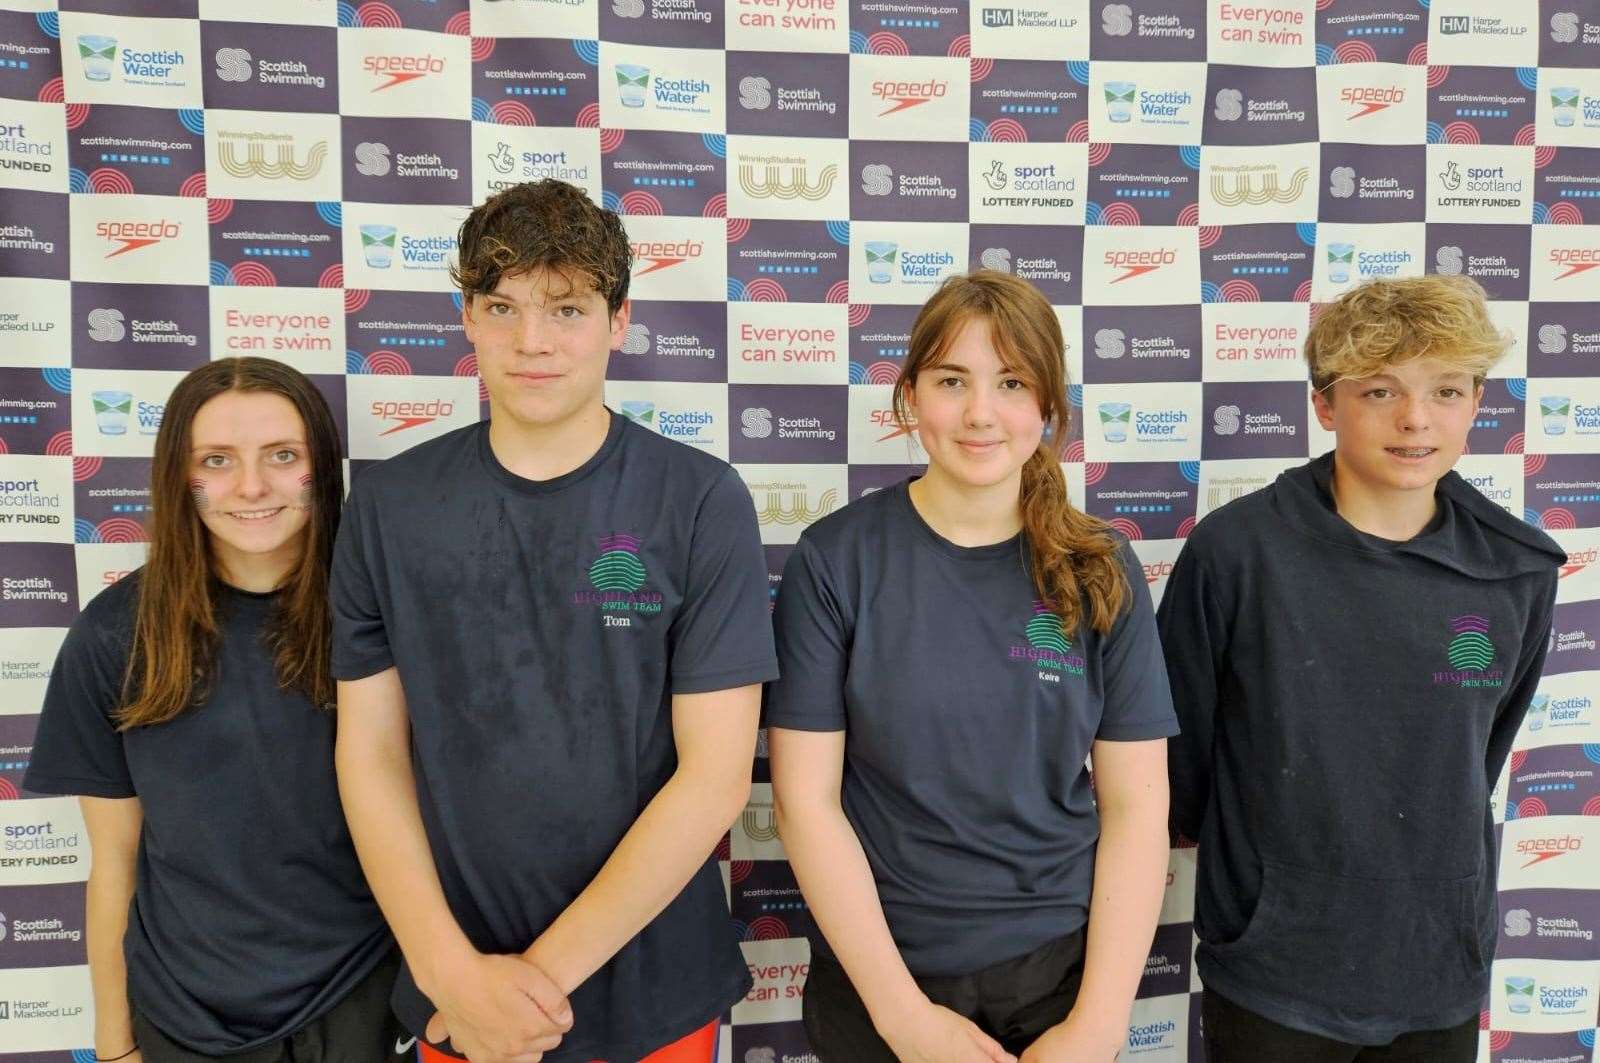 From left: Emily MacDougall, Tom Armitage, Keira Bain and Jed Armitage (missing from the picture is Megan Mackay).